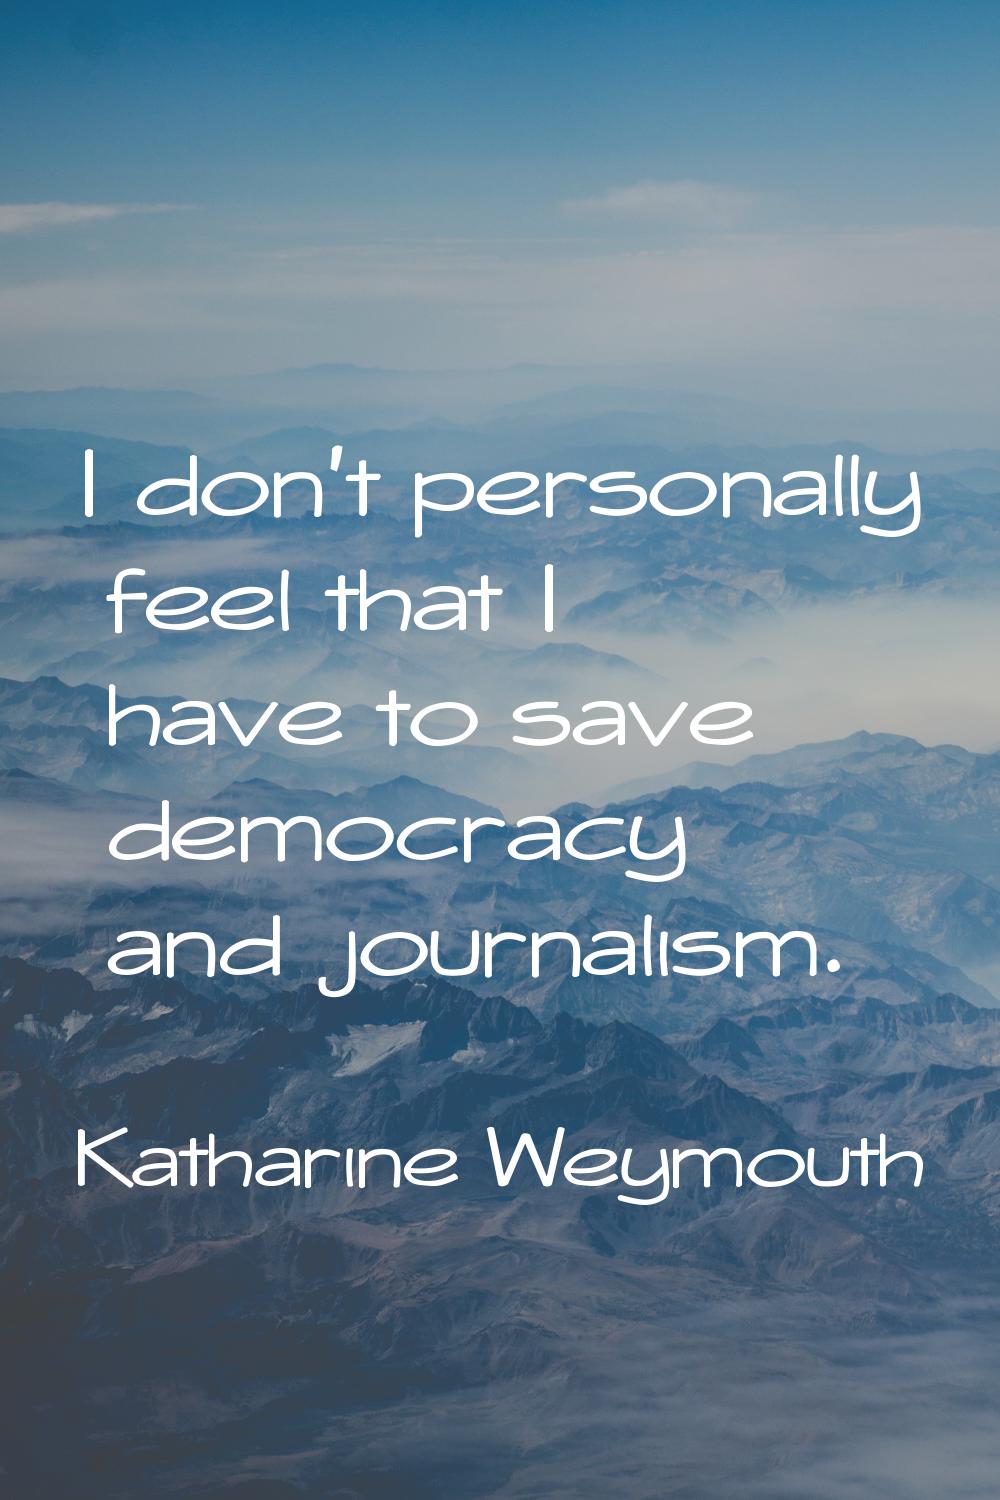 I don't personally feel that I have to save democracy and journalism.